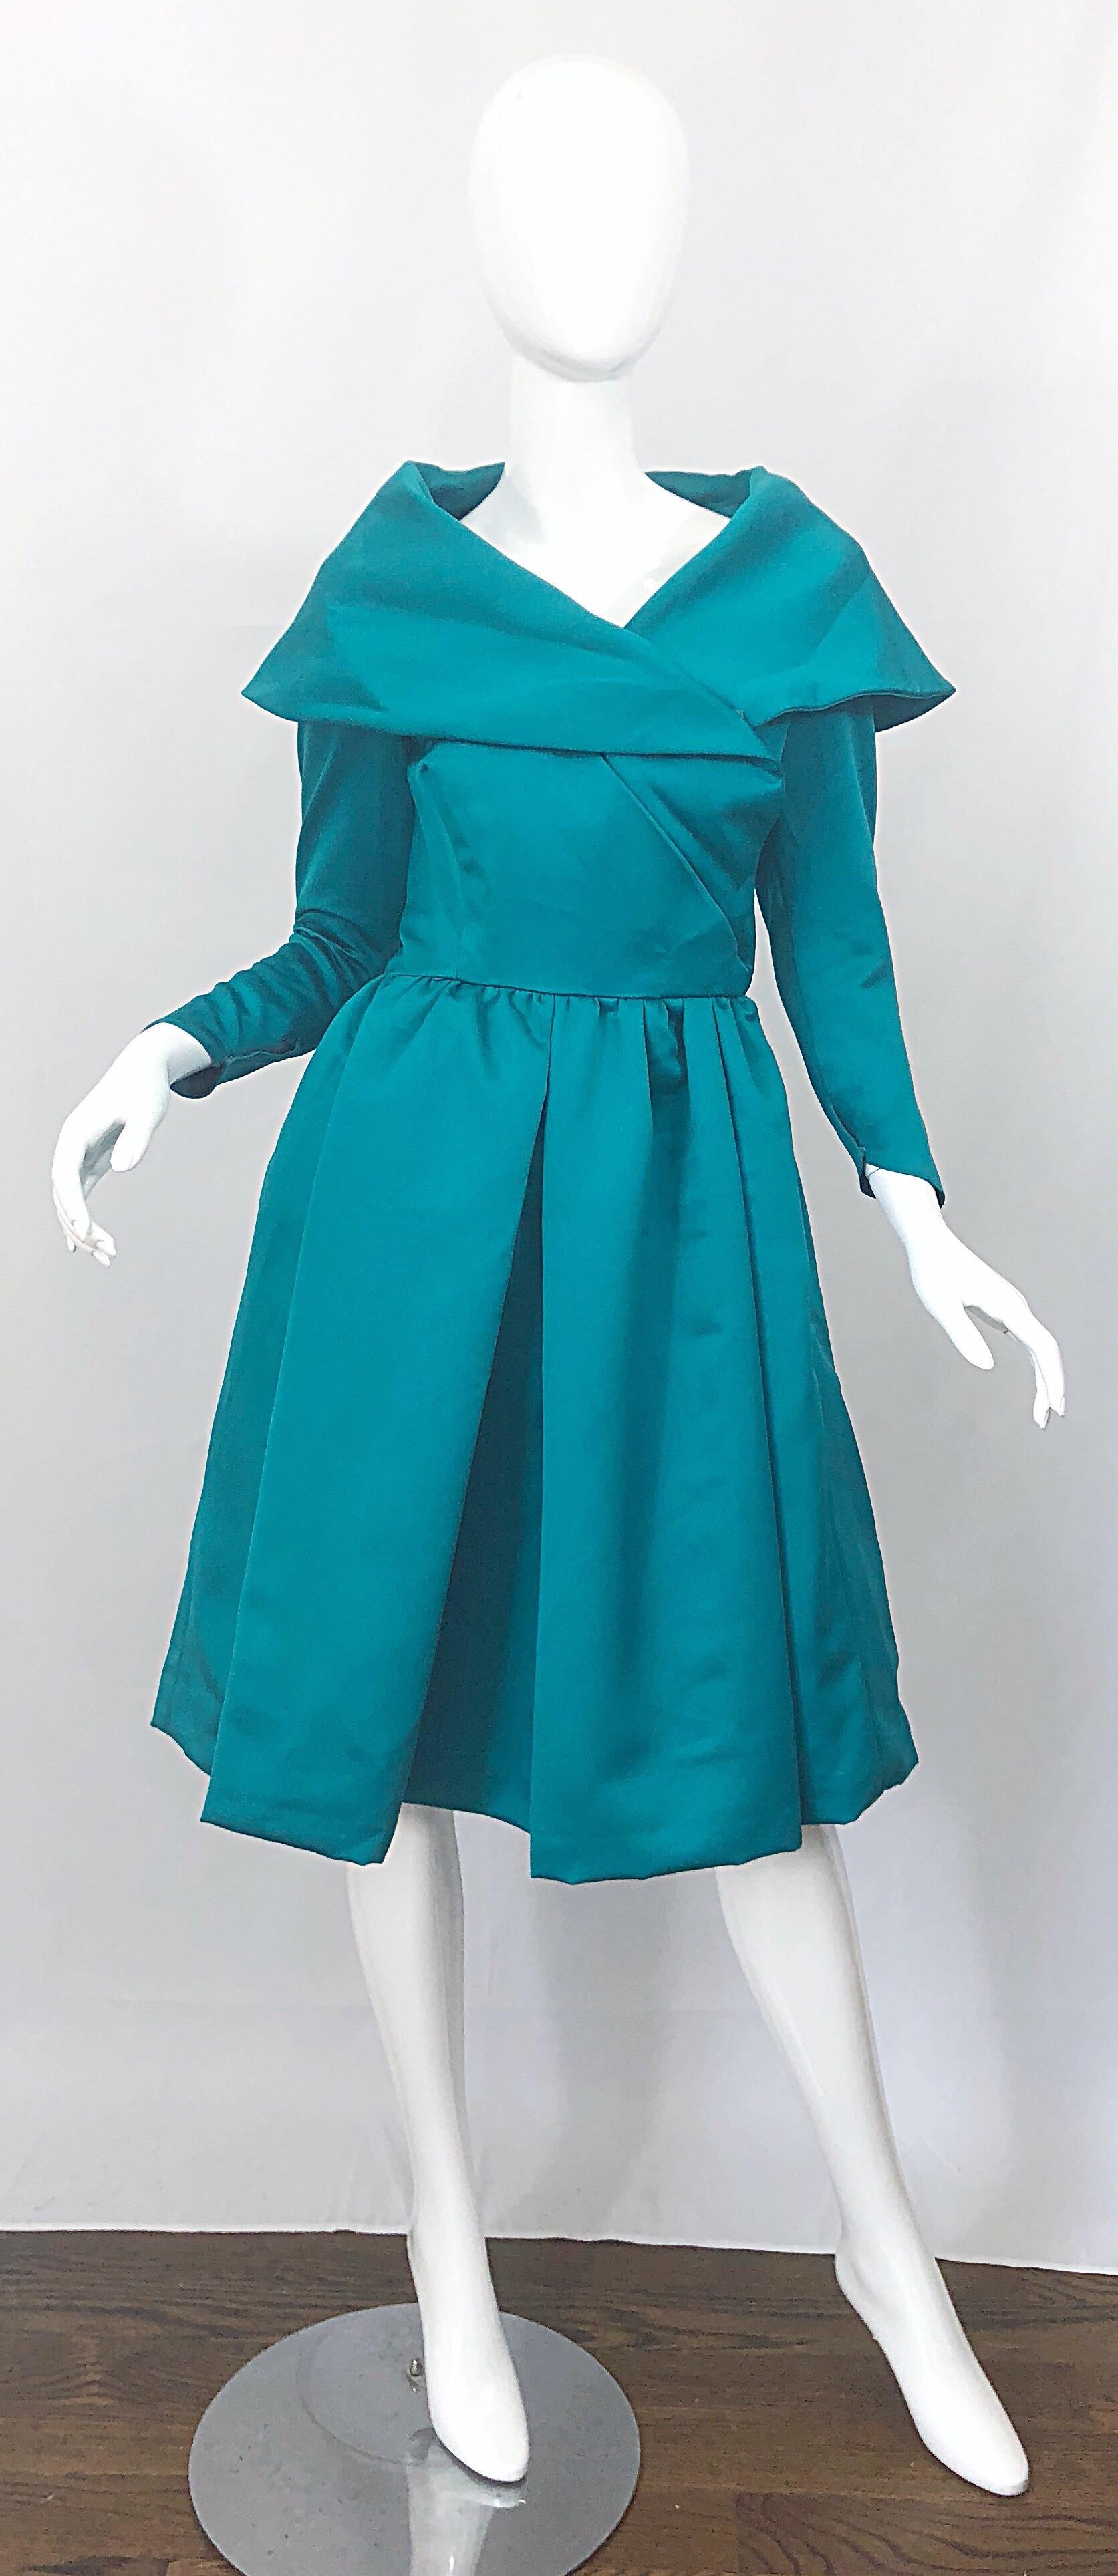 Beautiful vintage VICTOR COSTA teal green / blue satin fit n' flare long sleeve cocktail dress! Features an elegant collar with a fitted bodice and tulip shaped sleeve cuff that has hidden snaps. Wrap style with several hidden snaps and hook-and-eye